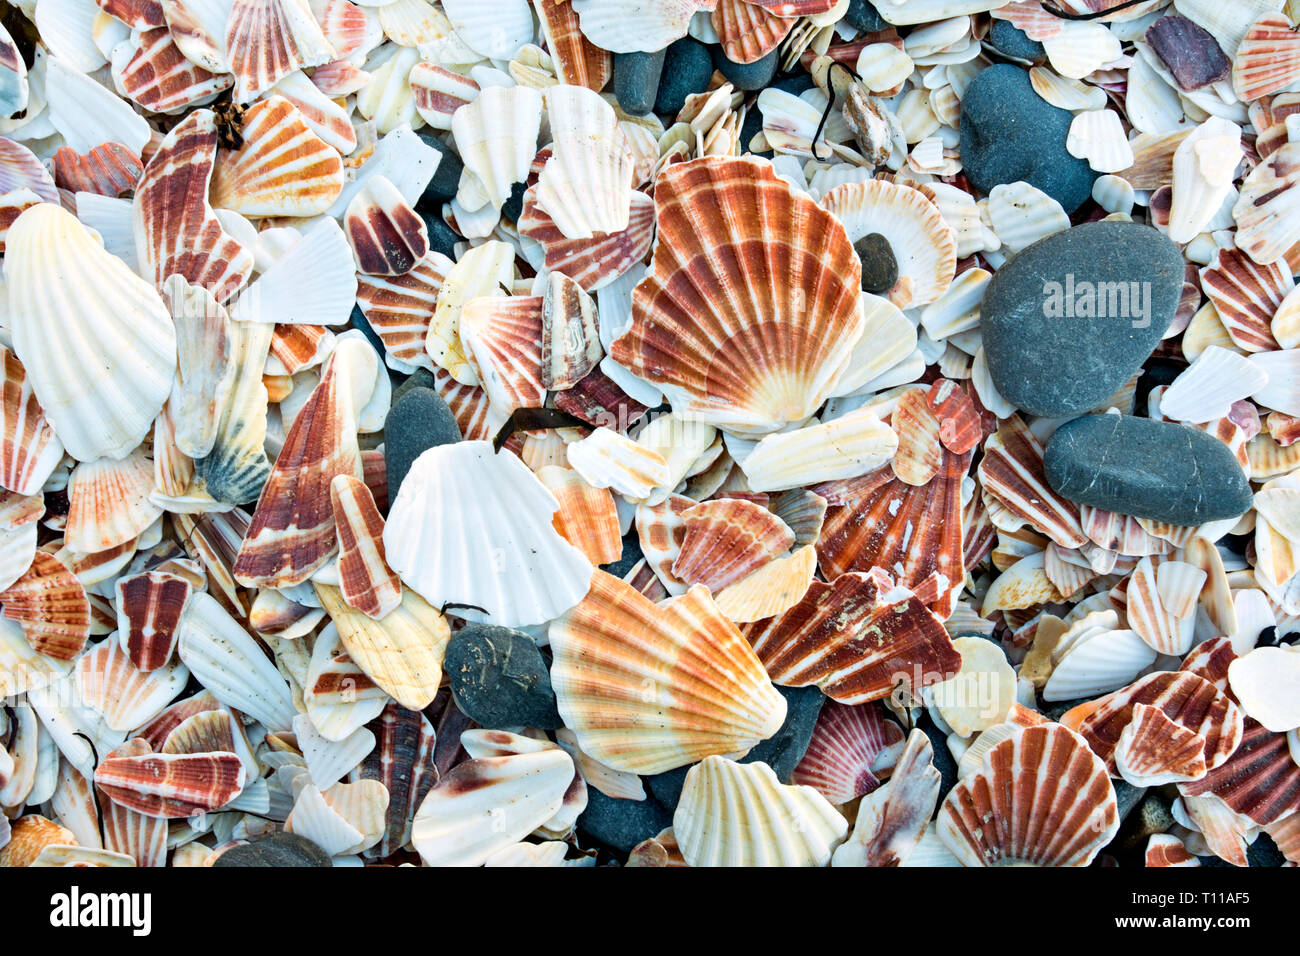 Europe, Great Britain, isle of Man. Scallop shells on a beach. Stock Photo